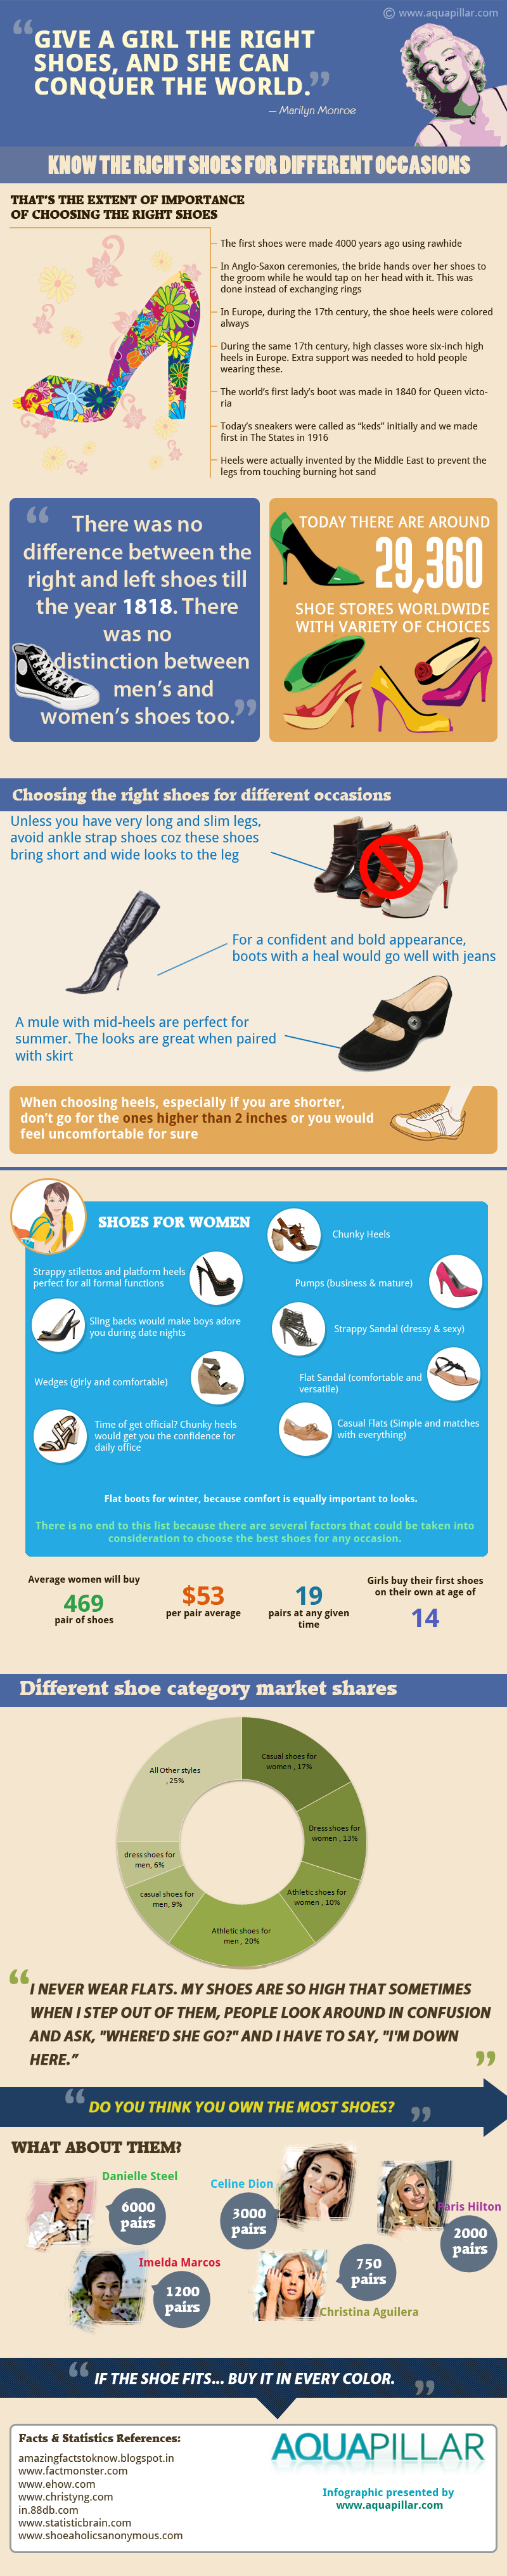 Know The Right Shoes For Different Occasions